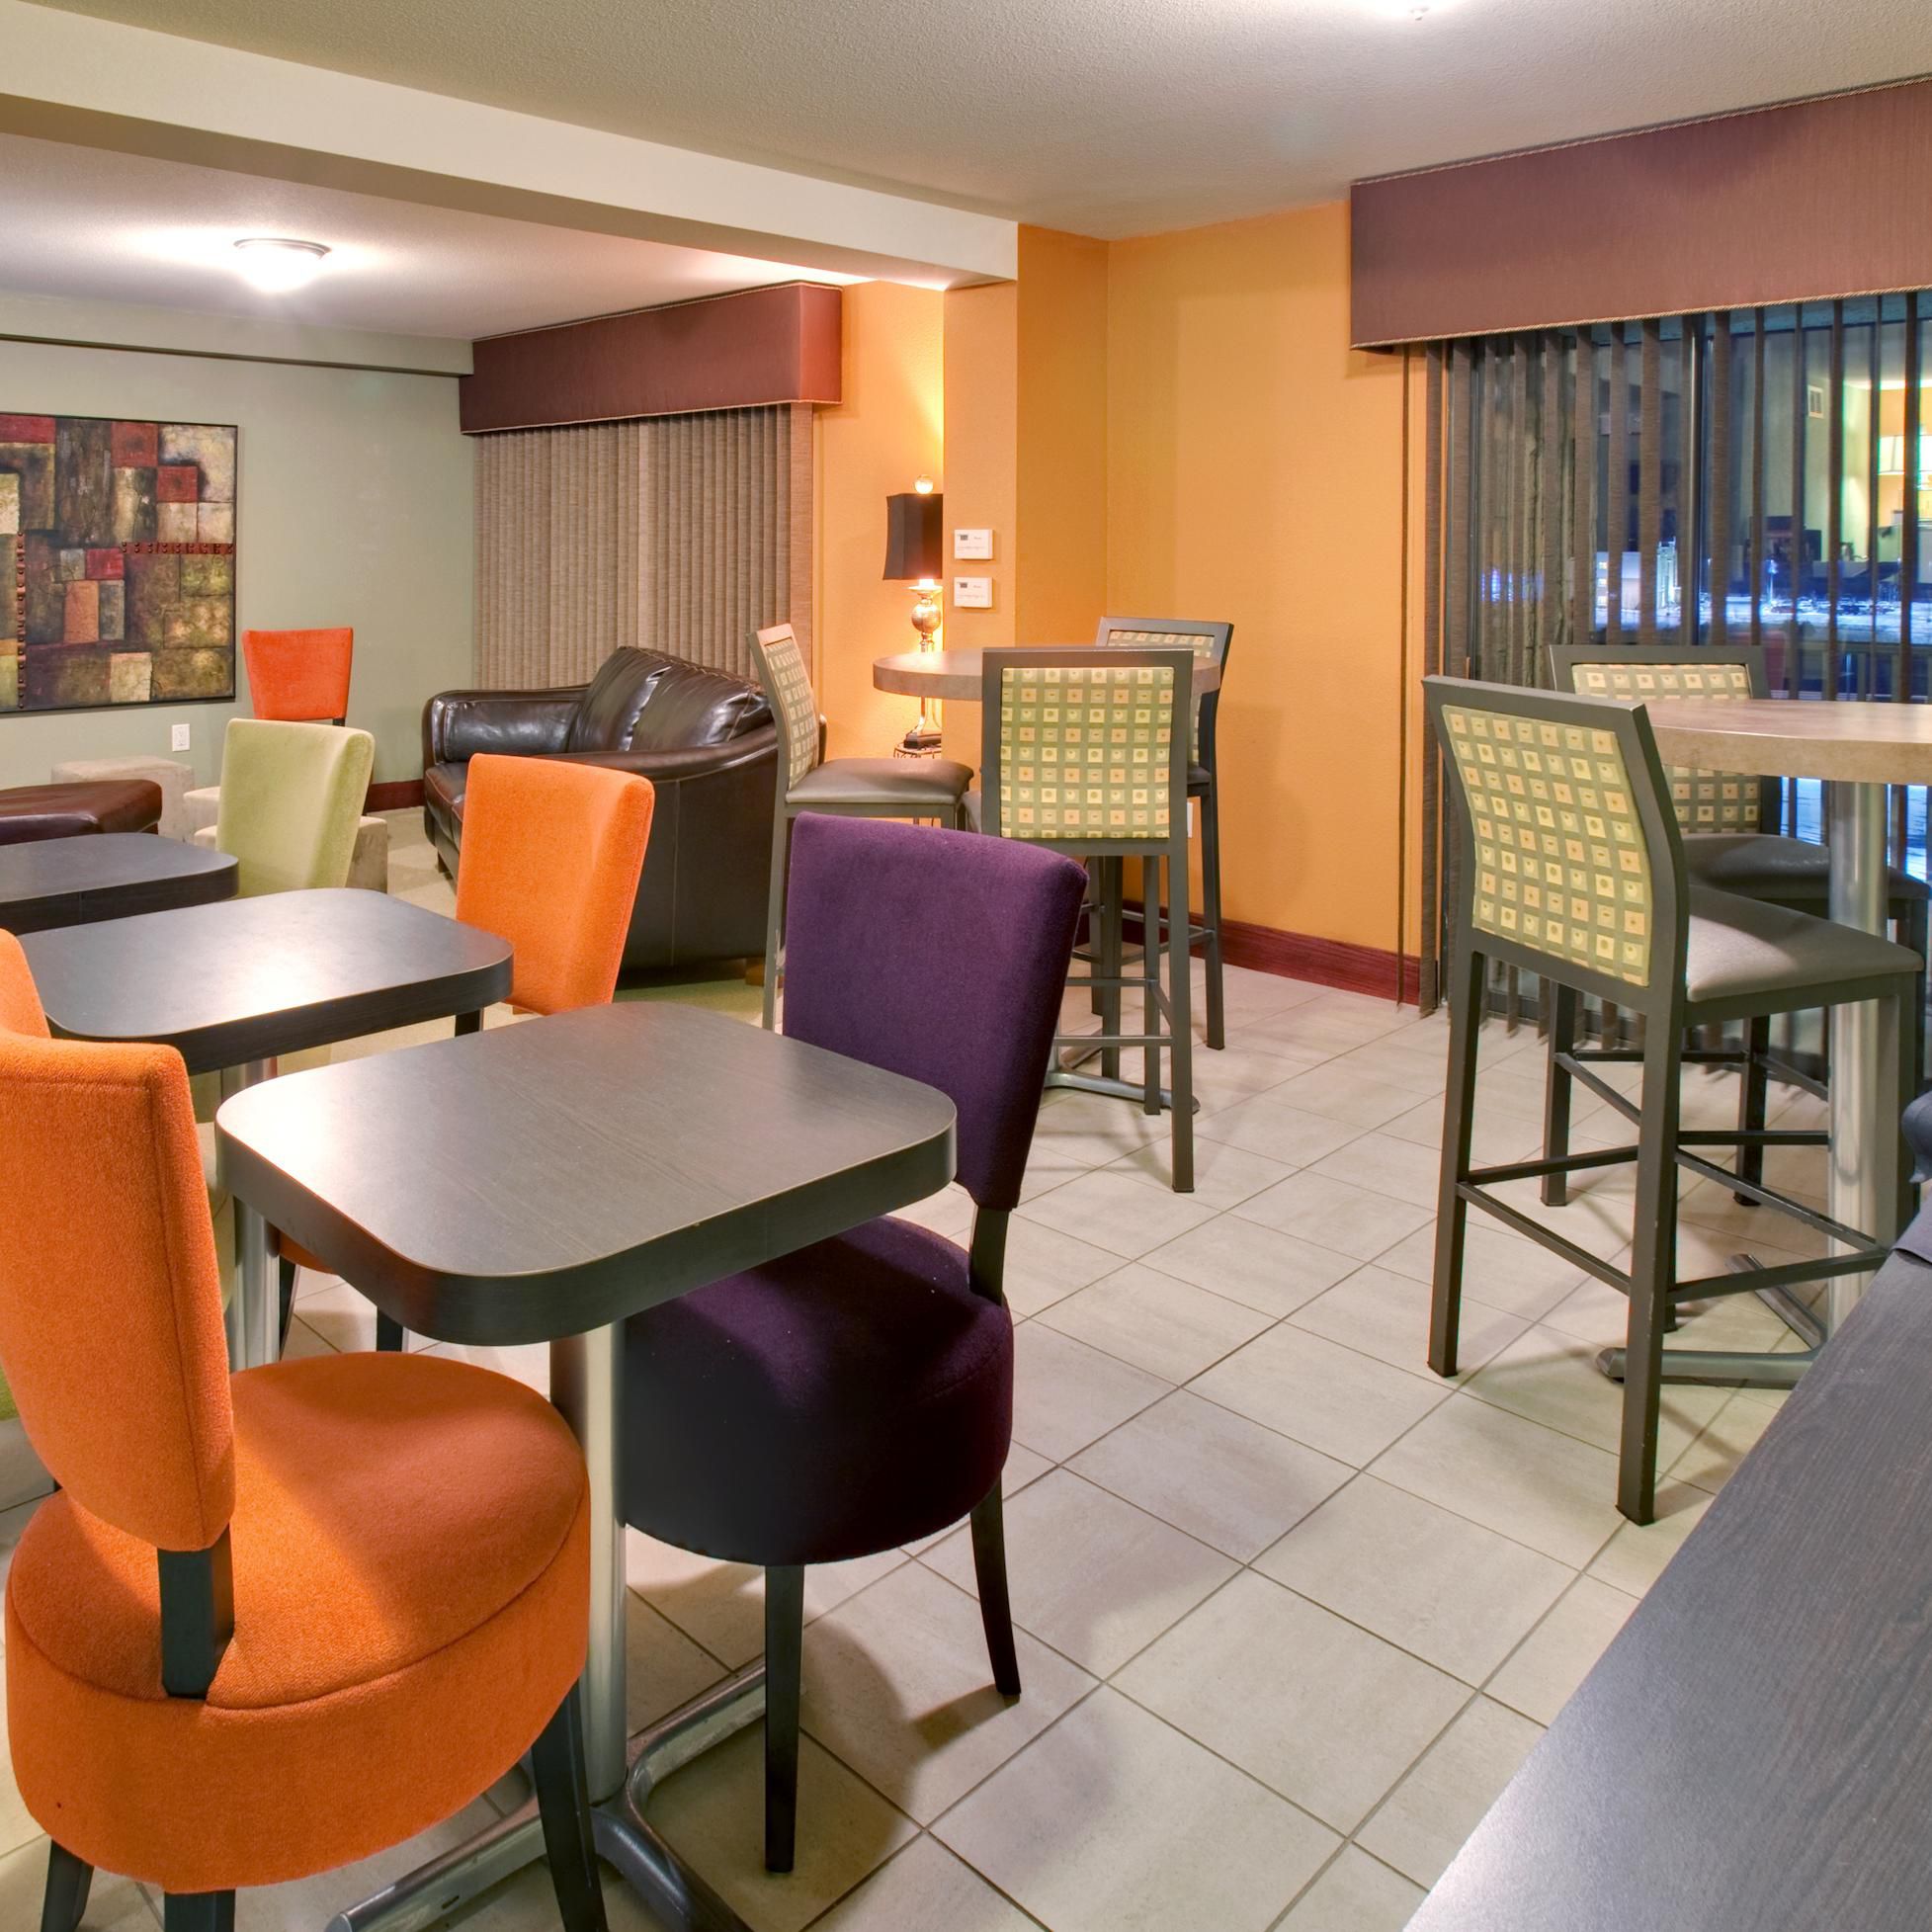 Concierge Lounge at the Crowne Plaza hotel near Miller Park